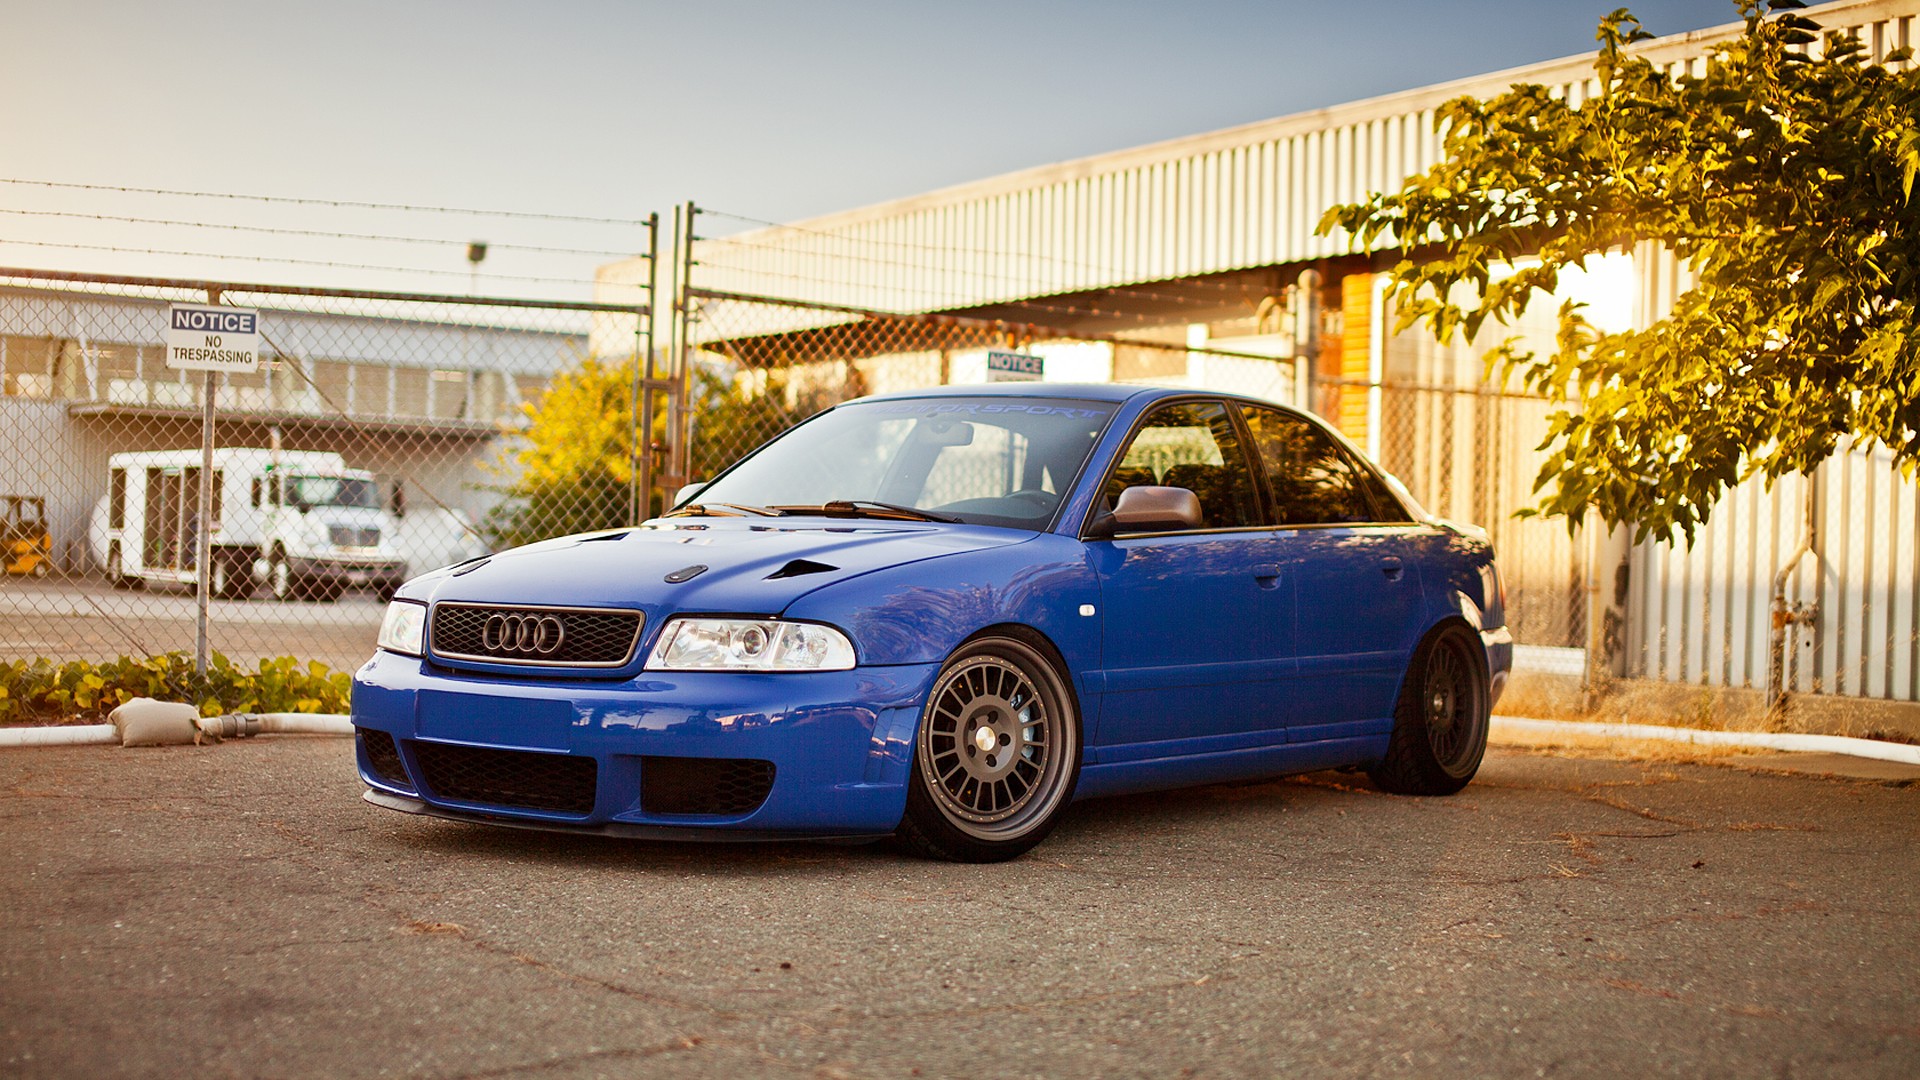 Audi S4 backgrounds Download Free